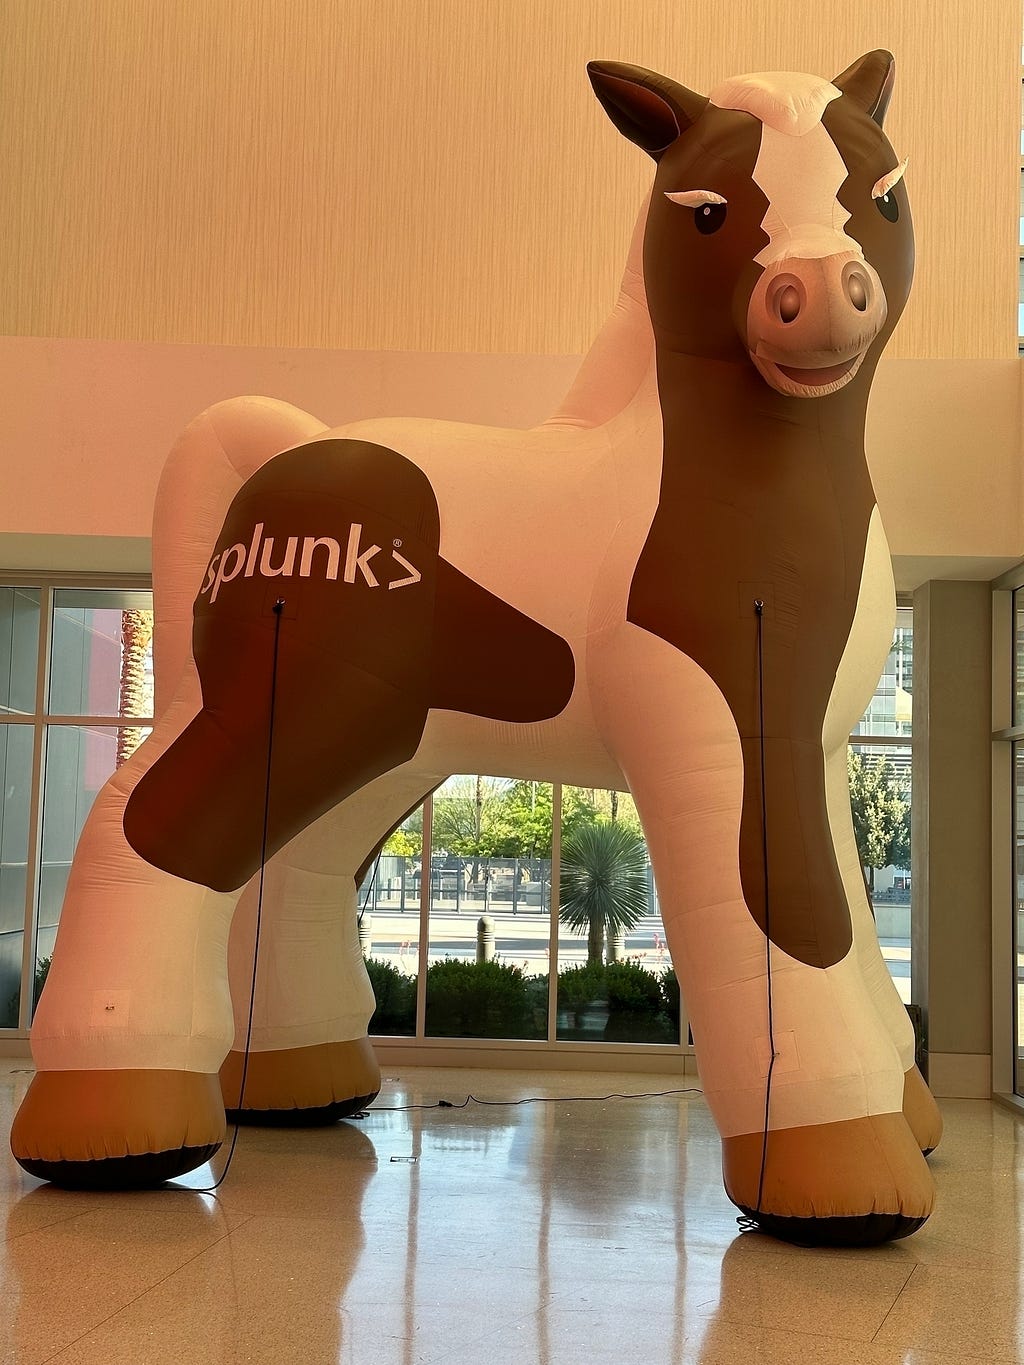 A large inflatable horse with the word Splunk on its side is displayed in a well-lit indoor area with windows in the background.